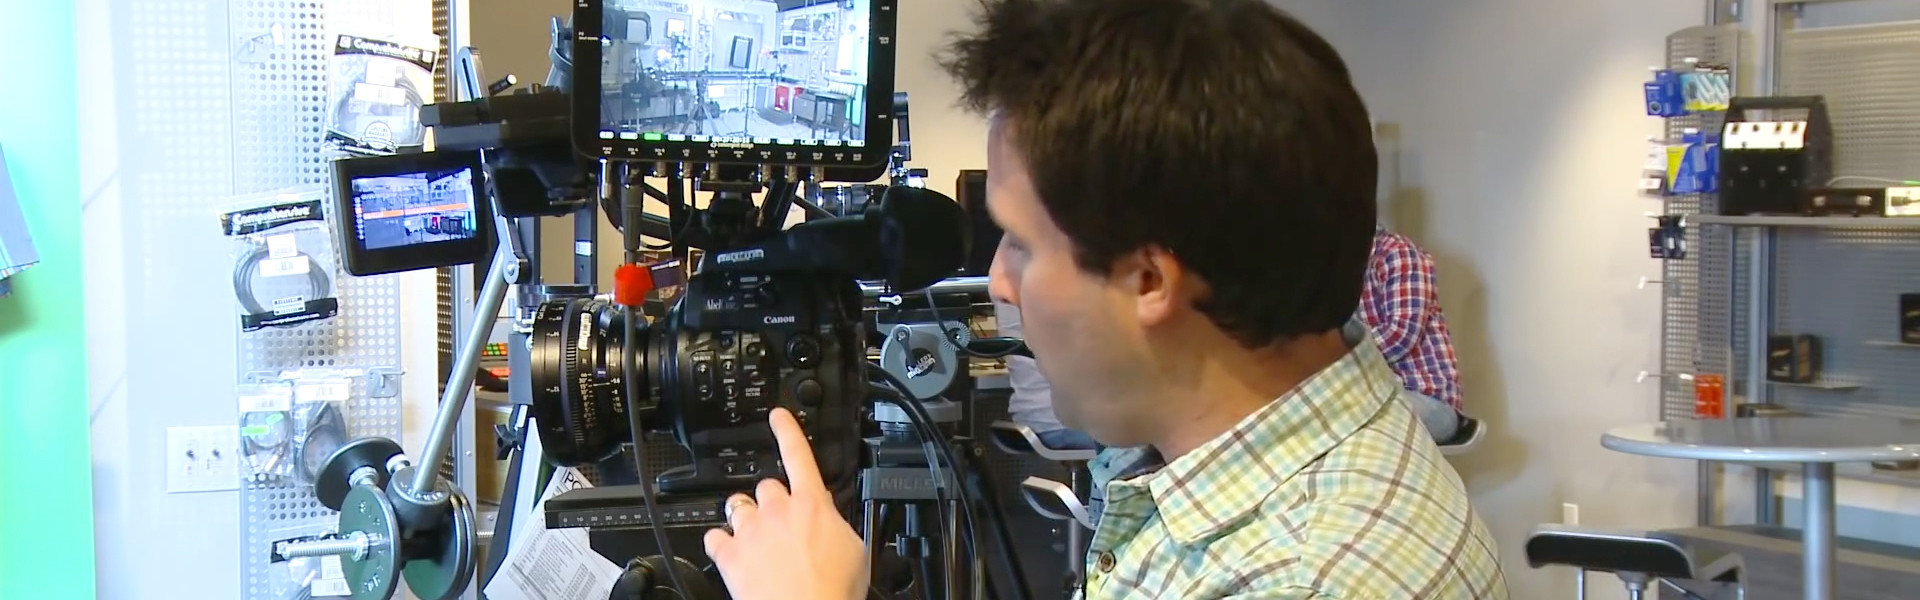 Header image for article At the Bench: C500 & Odyssey7Q 4K Raw/HD Recording